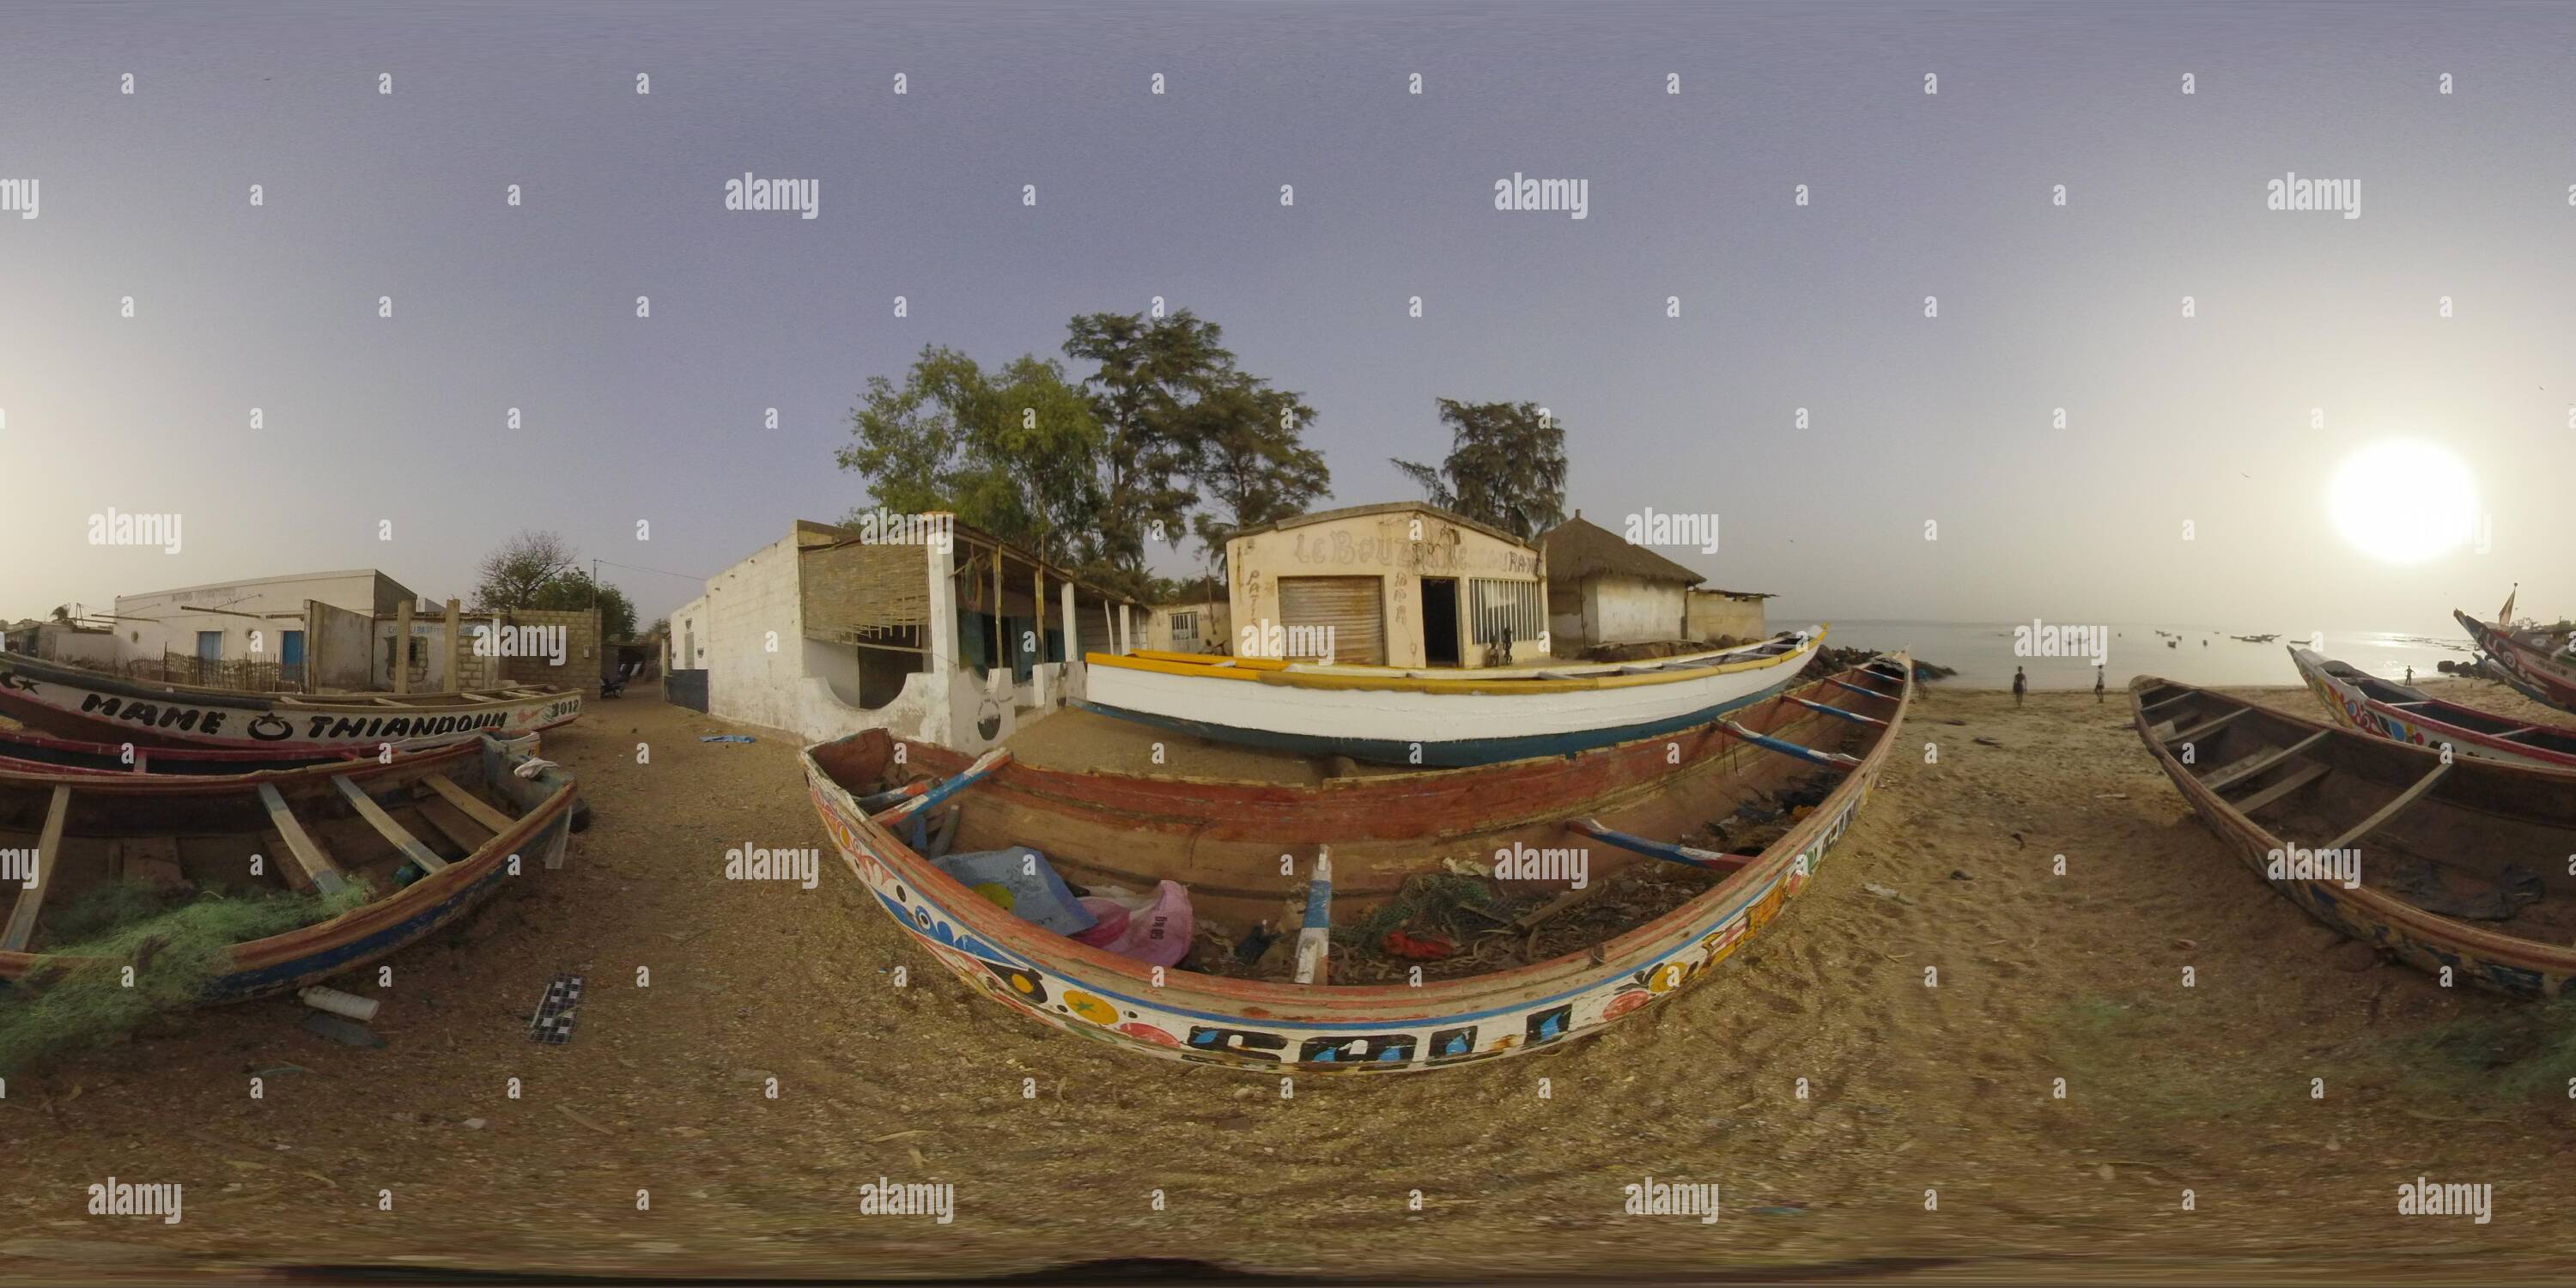 360 degree panoramic view of M´Bour, Senegal, 12th March 2019: 30 image of fishing boats by the sea